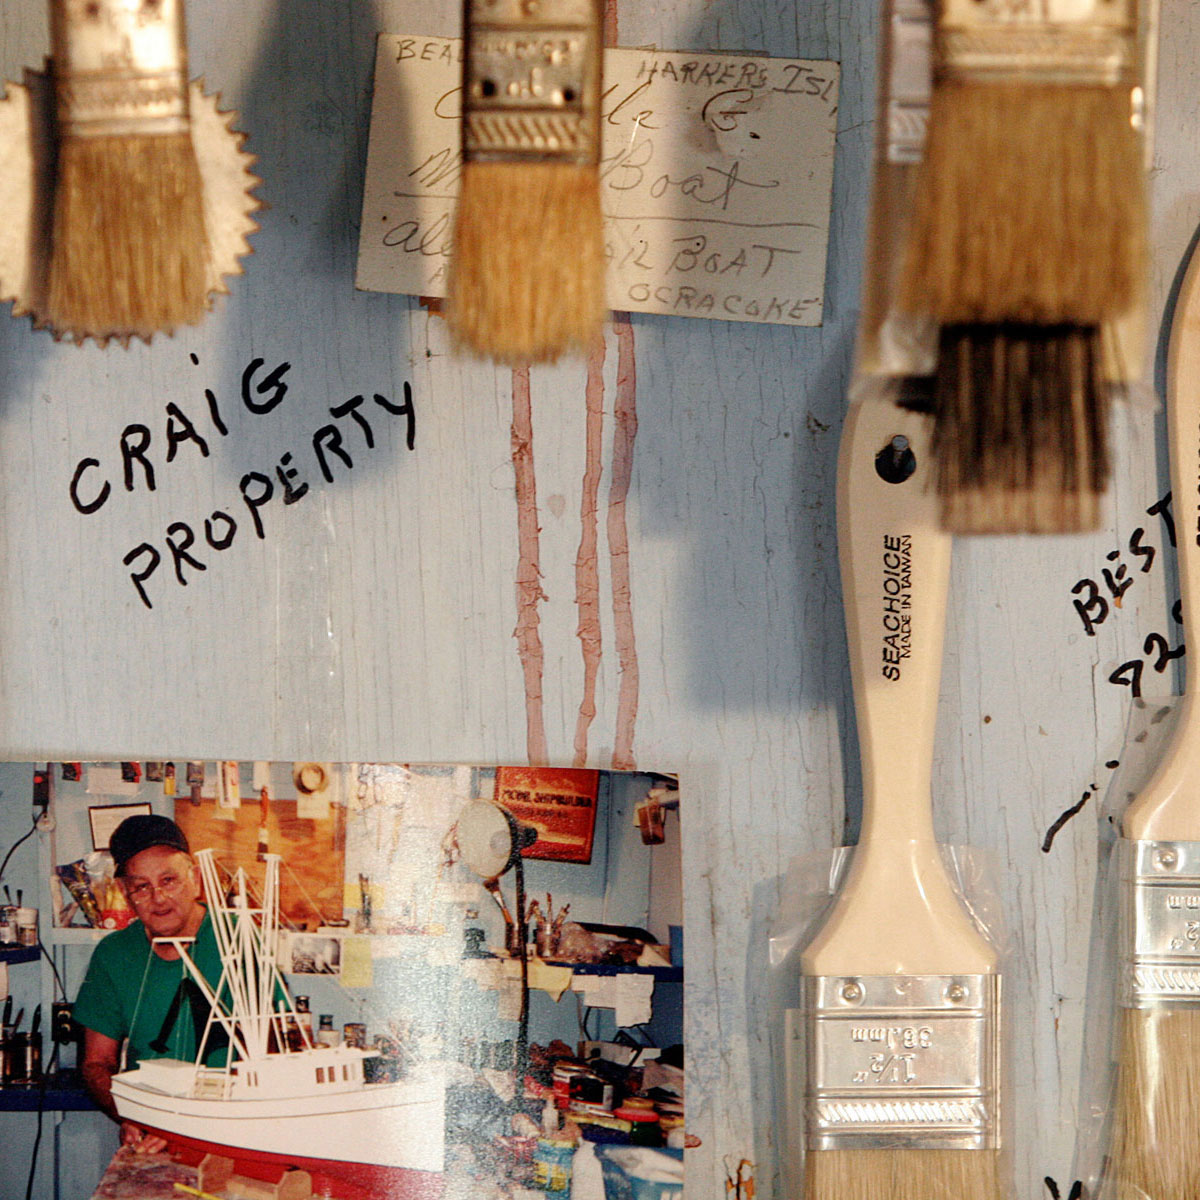 Painbrushes hanging on a weathered wall, along with a photograph of a man and a boat